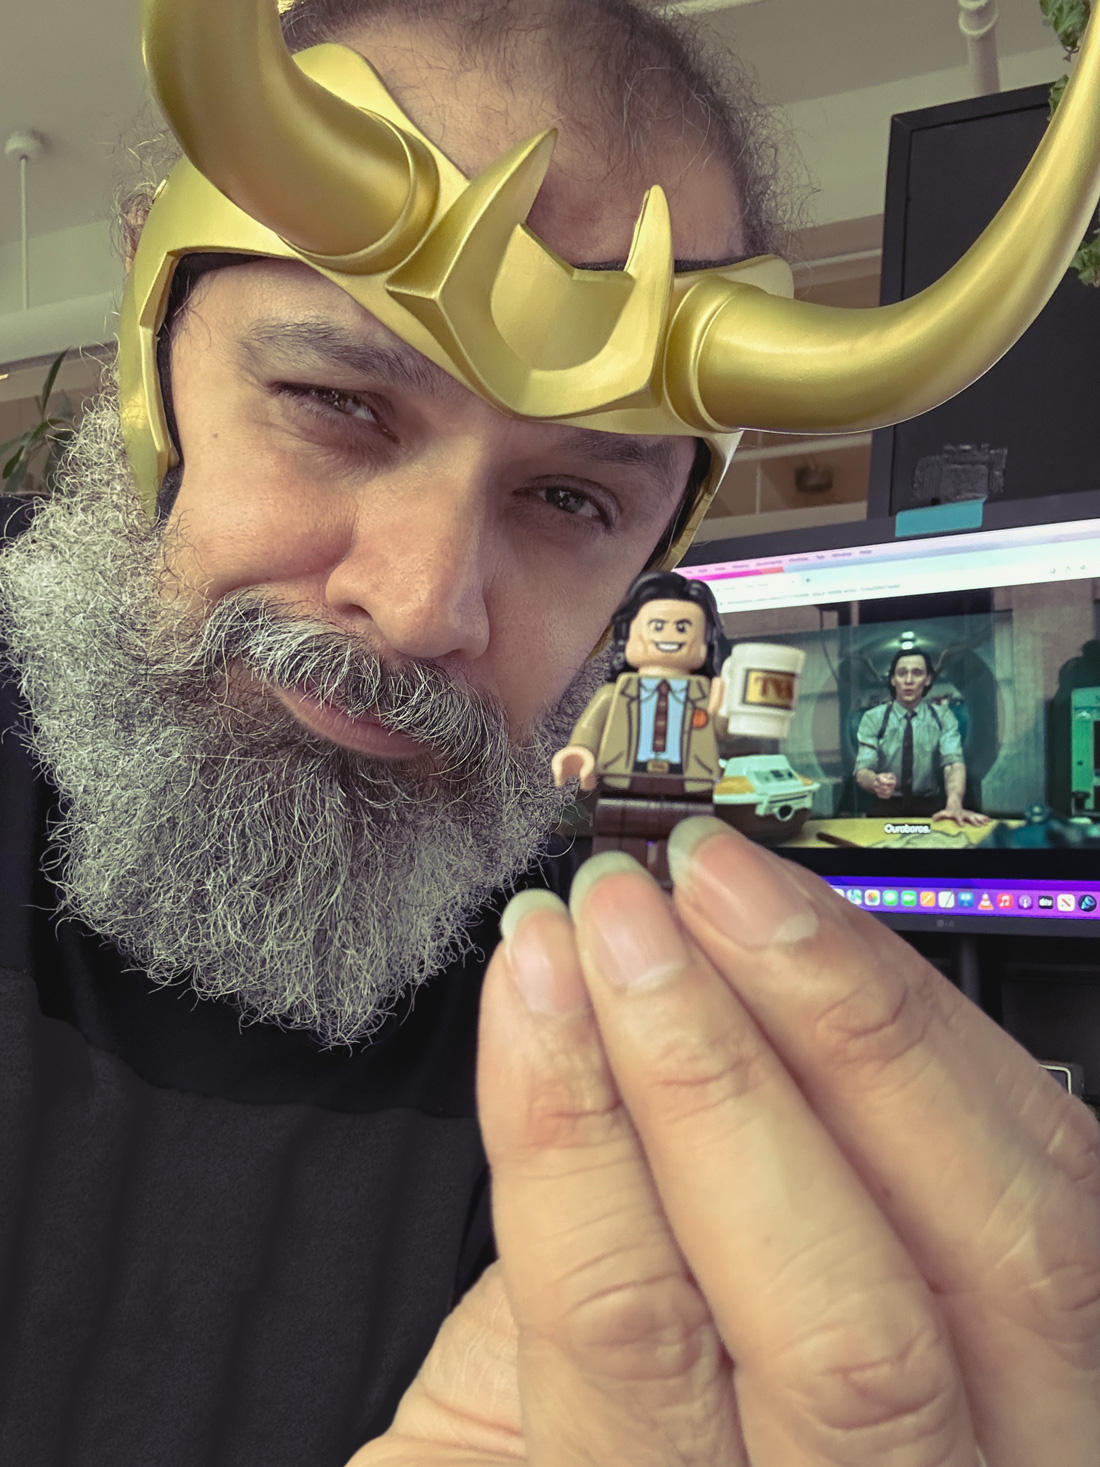 Picture Of William Fuentes Wearing Loki Season 2 Horns and a lego of Loki